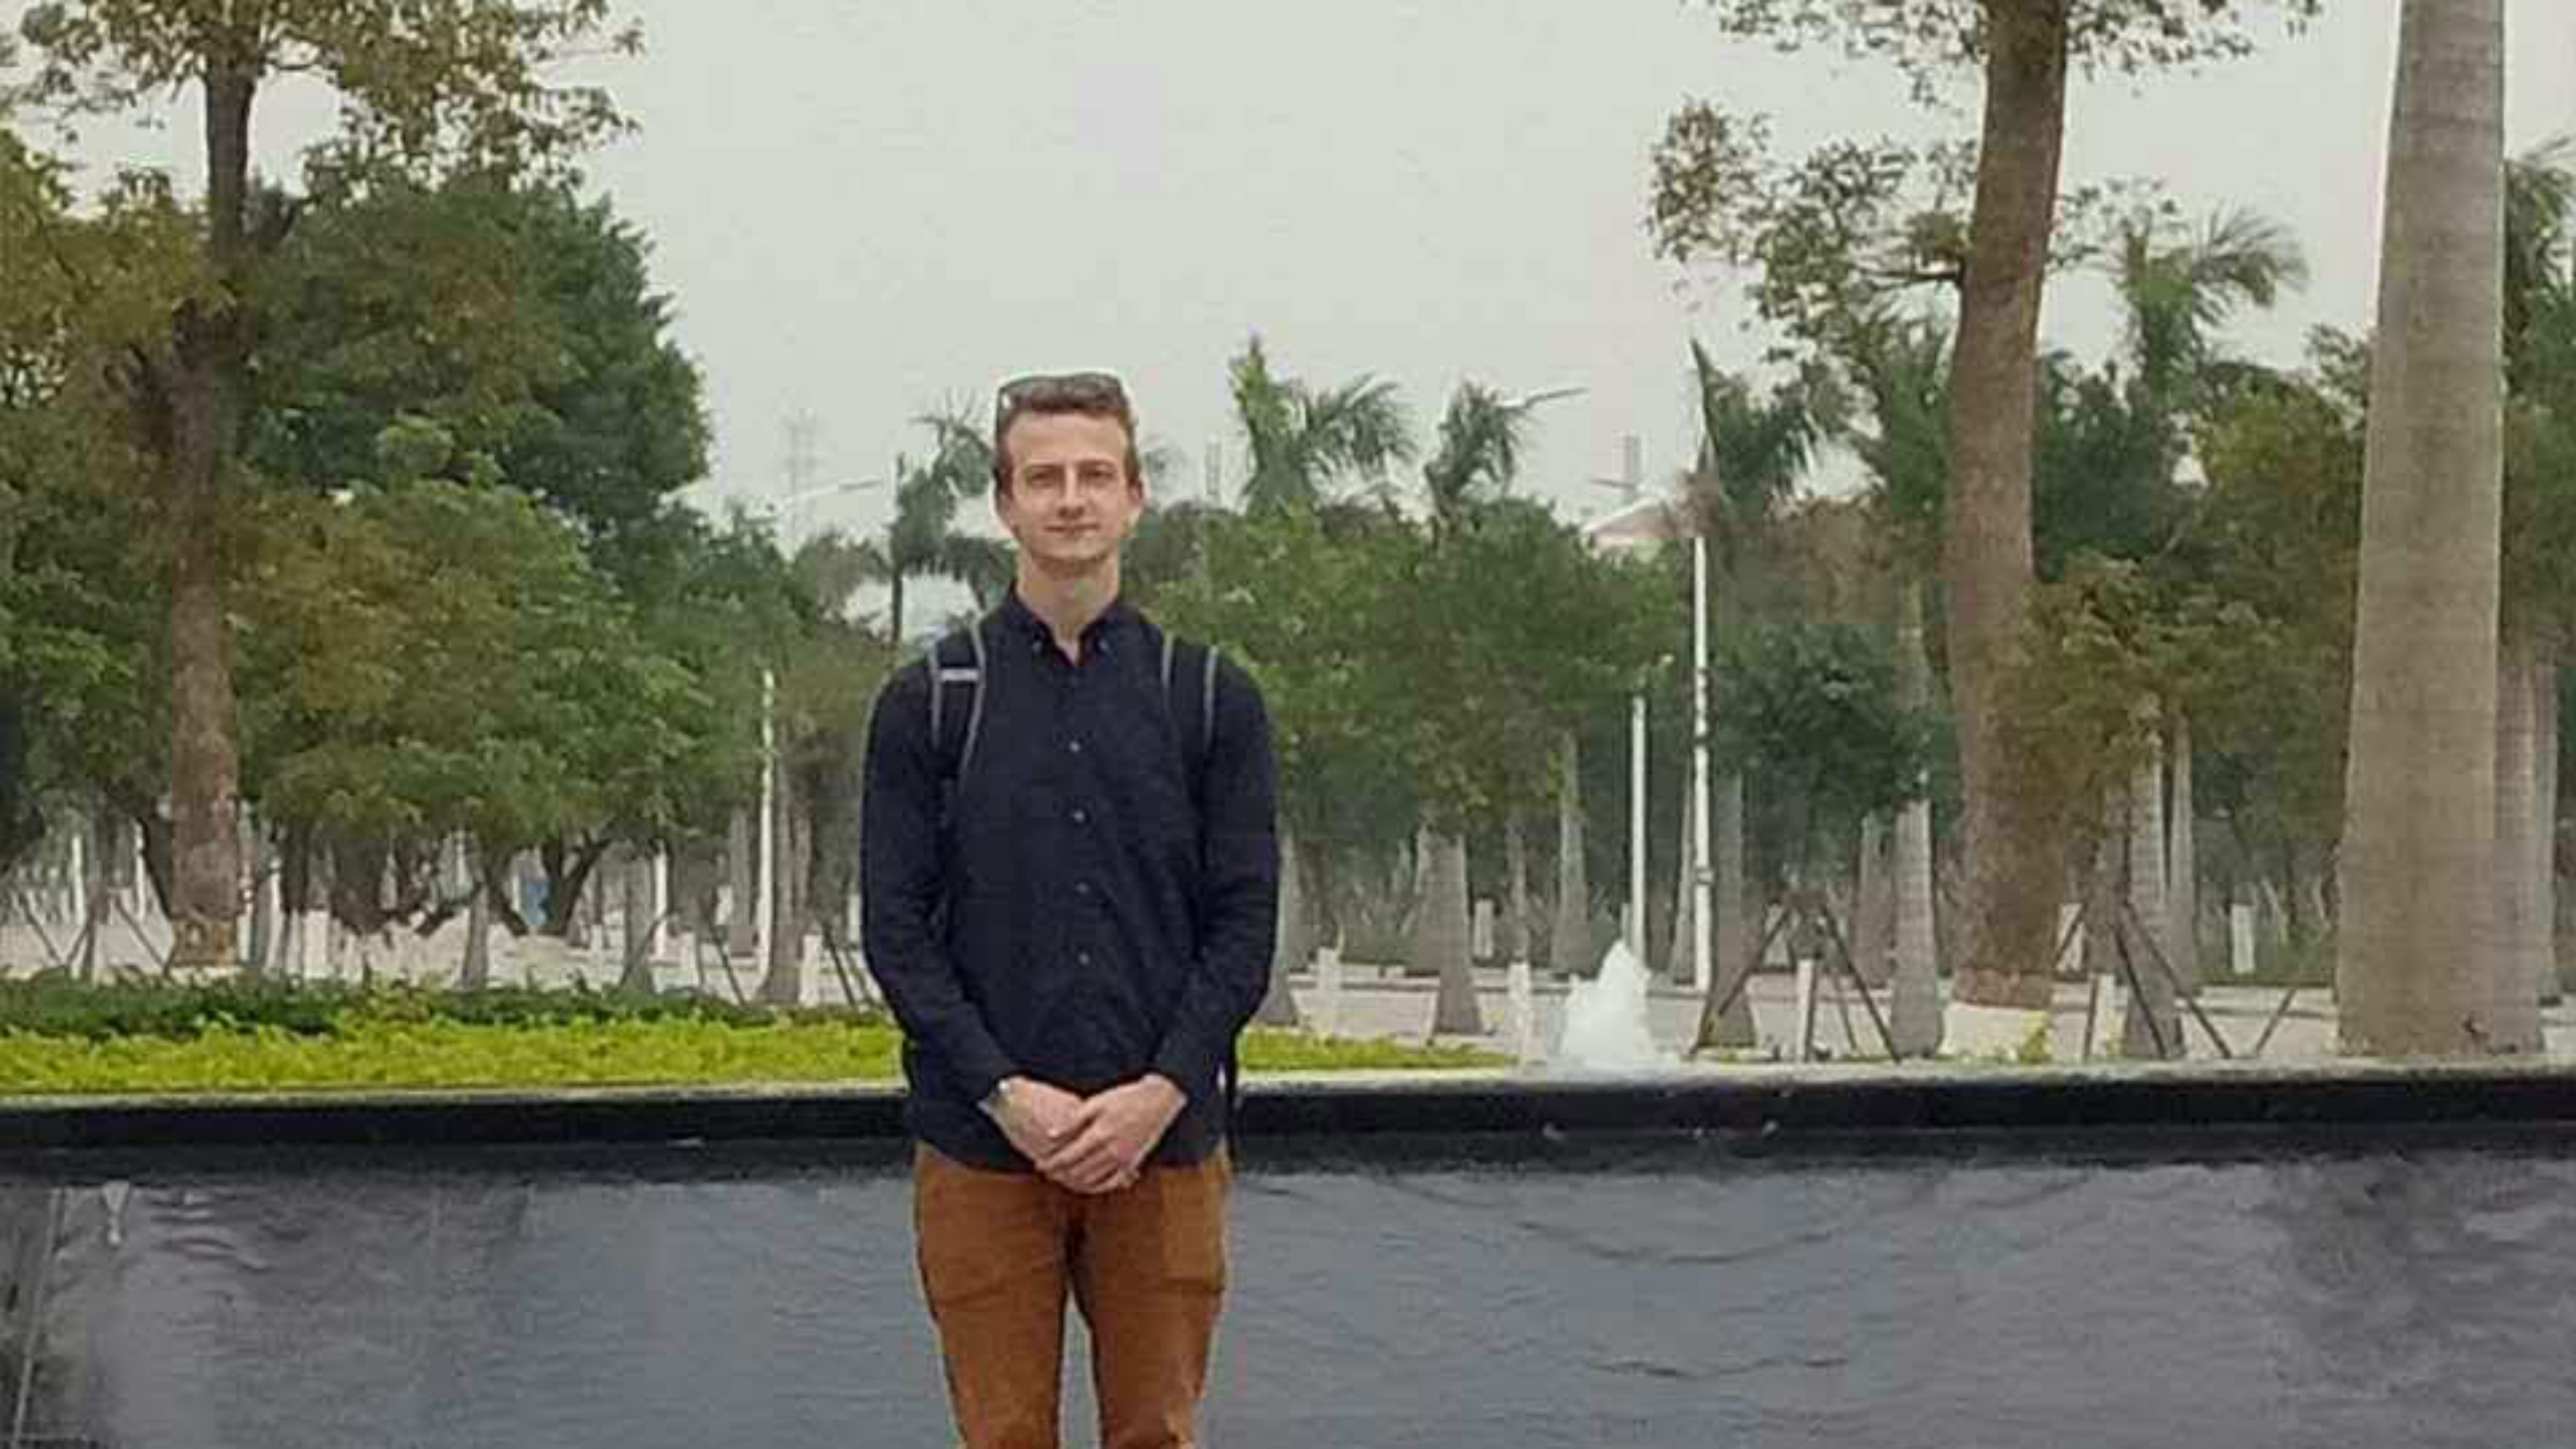 Alex on exchange in China, standing in front of a stream and trees.